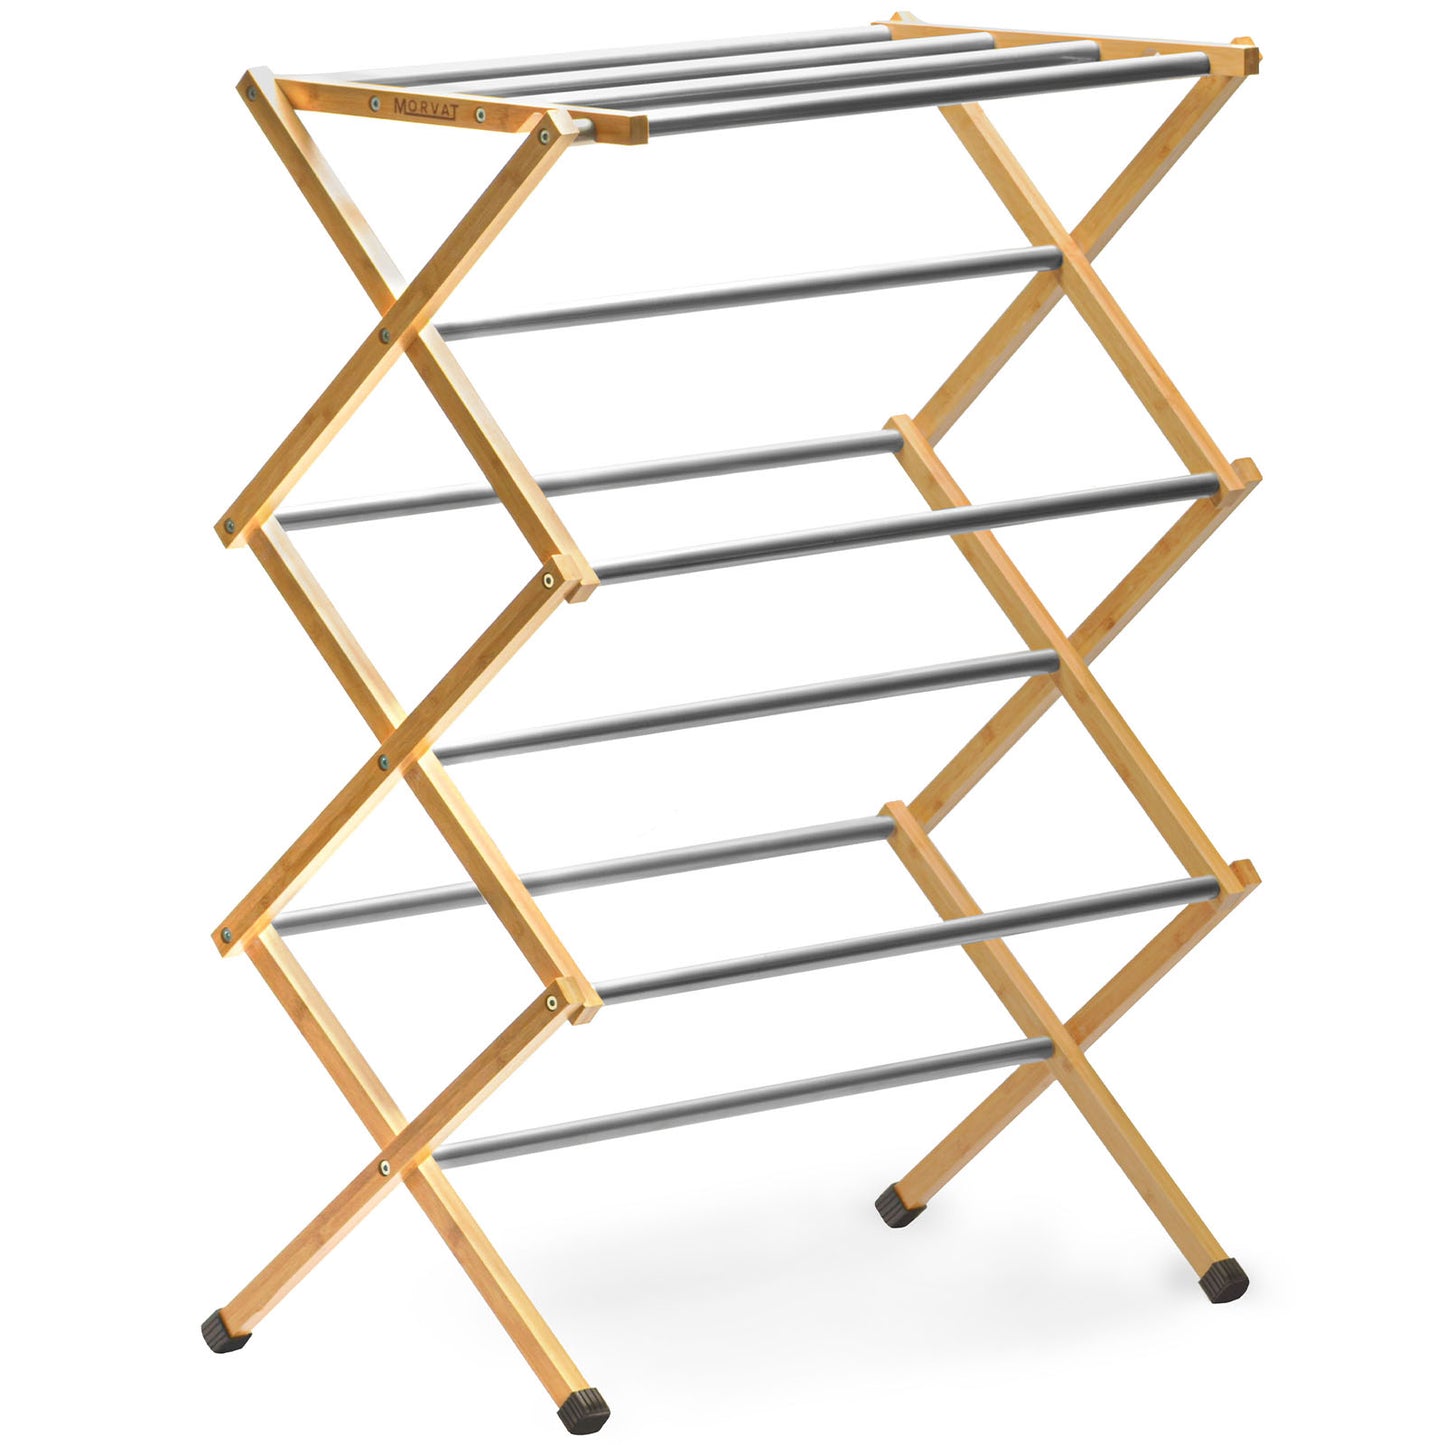 
                  
                    Bamboo Adjustable Laundry Drying Rack with Steel Bars, 23FT of Drying Space
                  
                